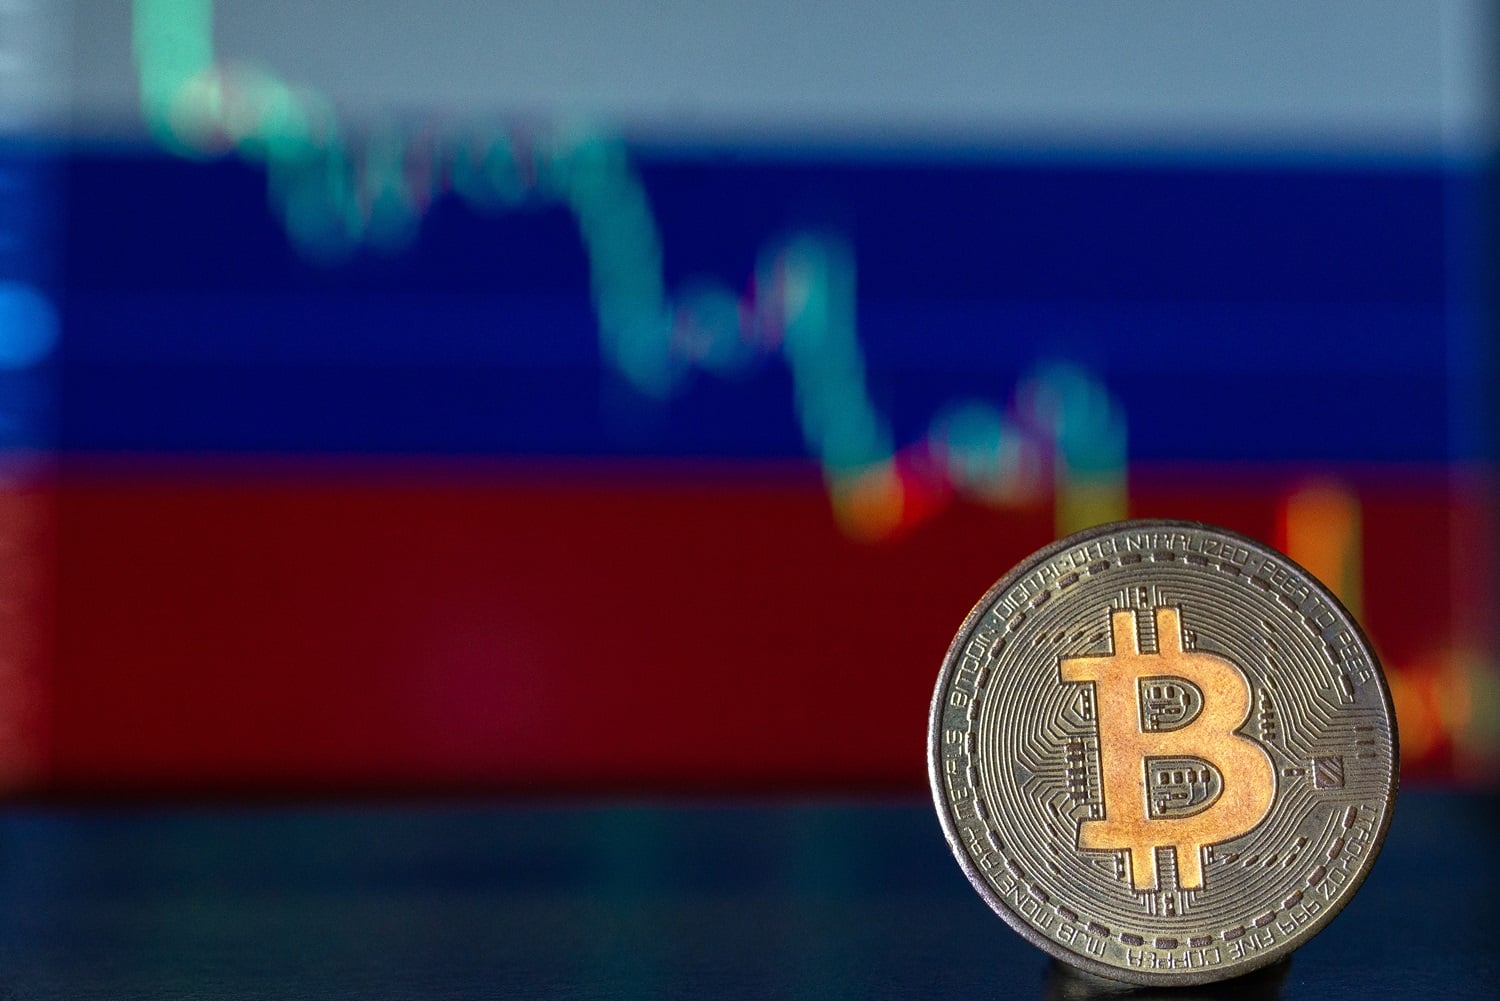 A token intended to represent Bitcoin against the background of the Russian flag and a graph.